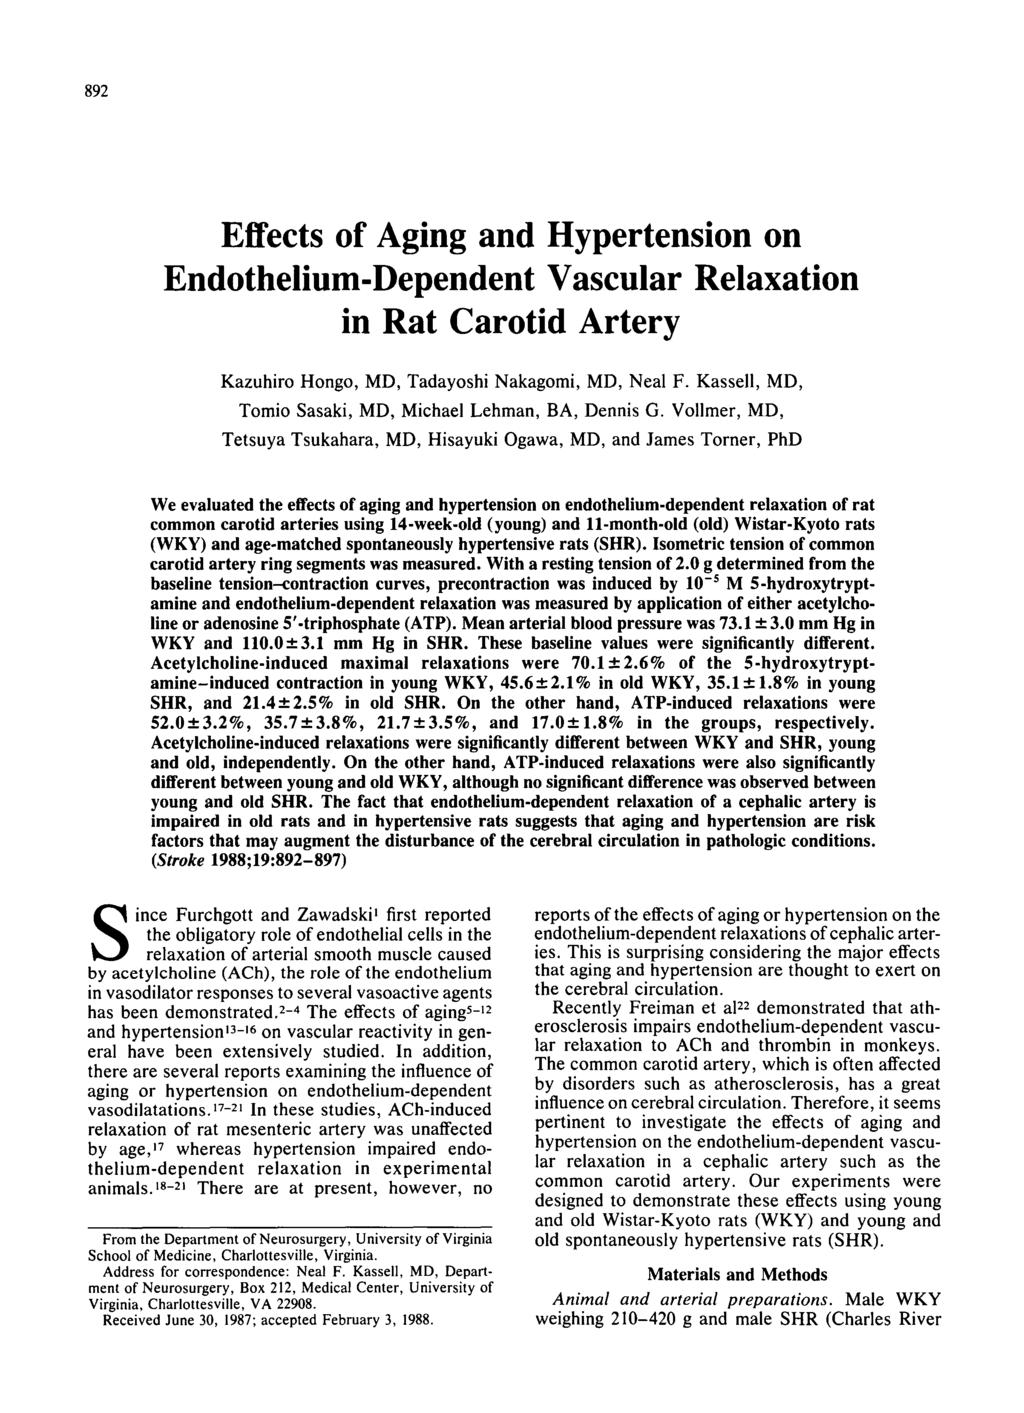 892 Effects of Aging and Hypertension on Endothelium-Dependent Vascular Relaxation in Rat Carotid Artery Kazuhiro Hongo, MD, Tadayoshi Nakagomi, MD, Neal F.